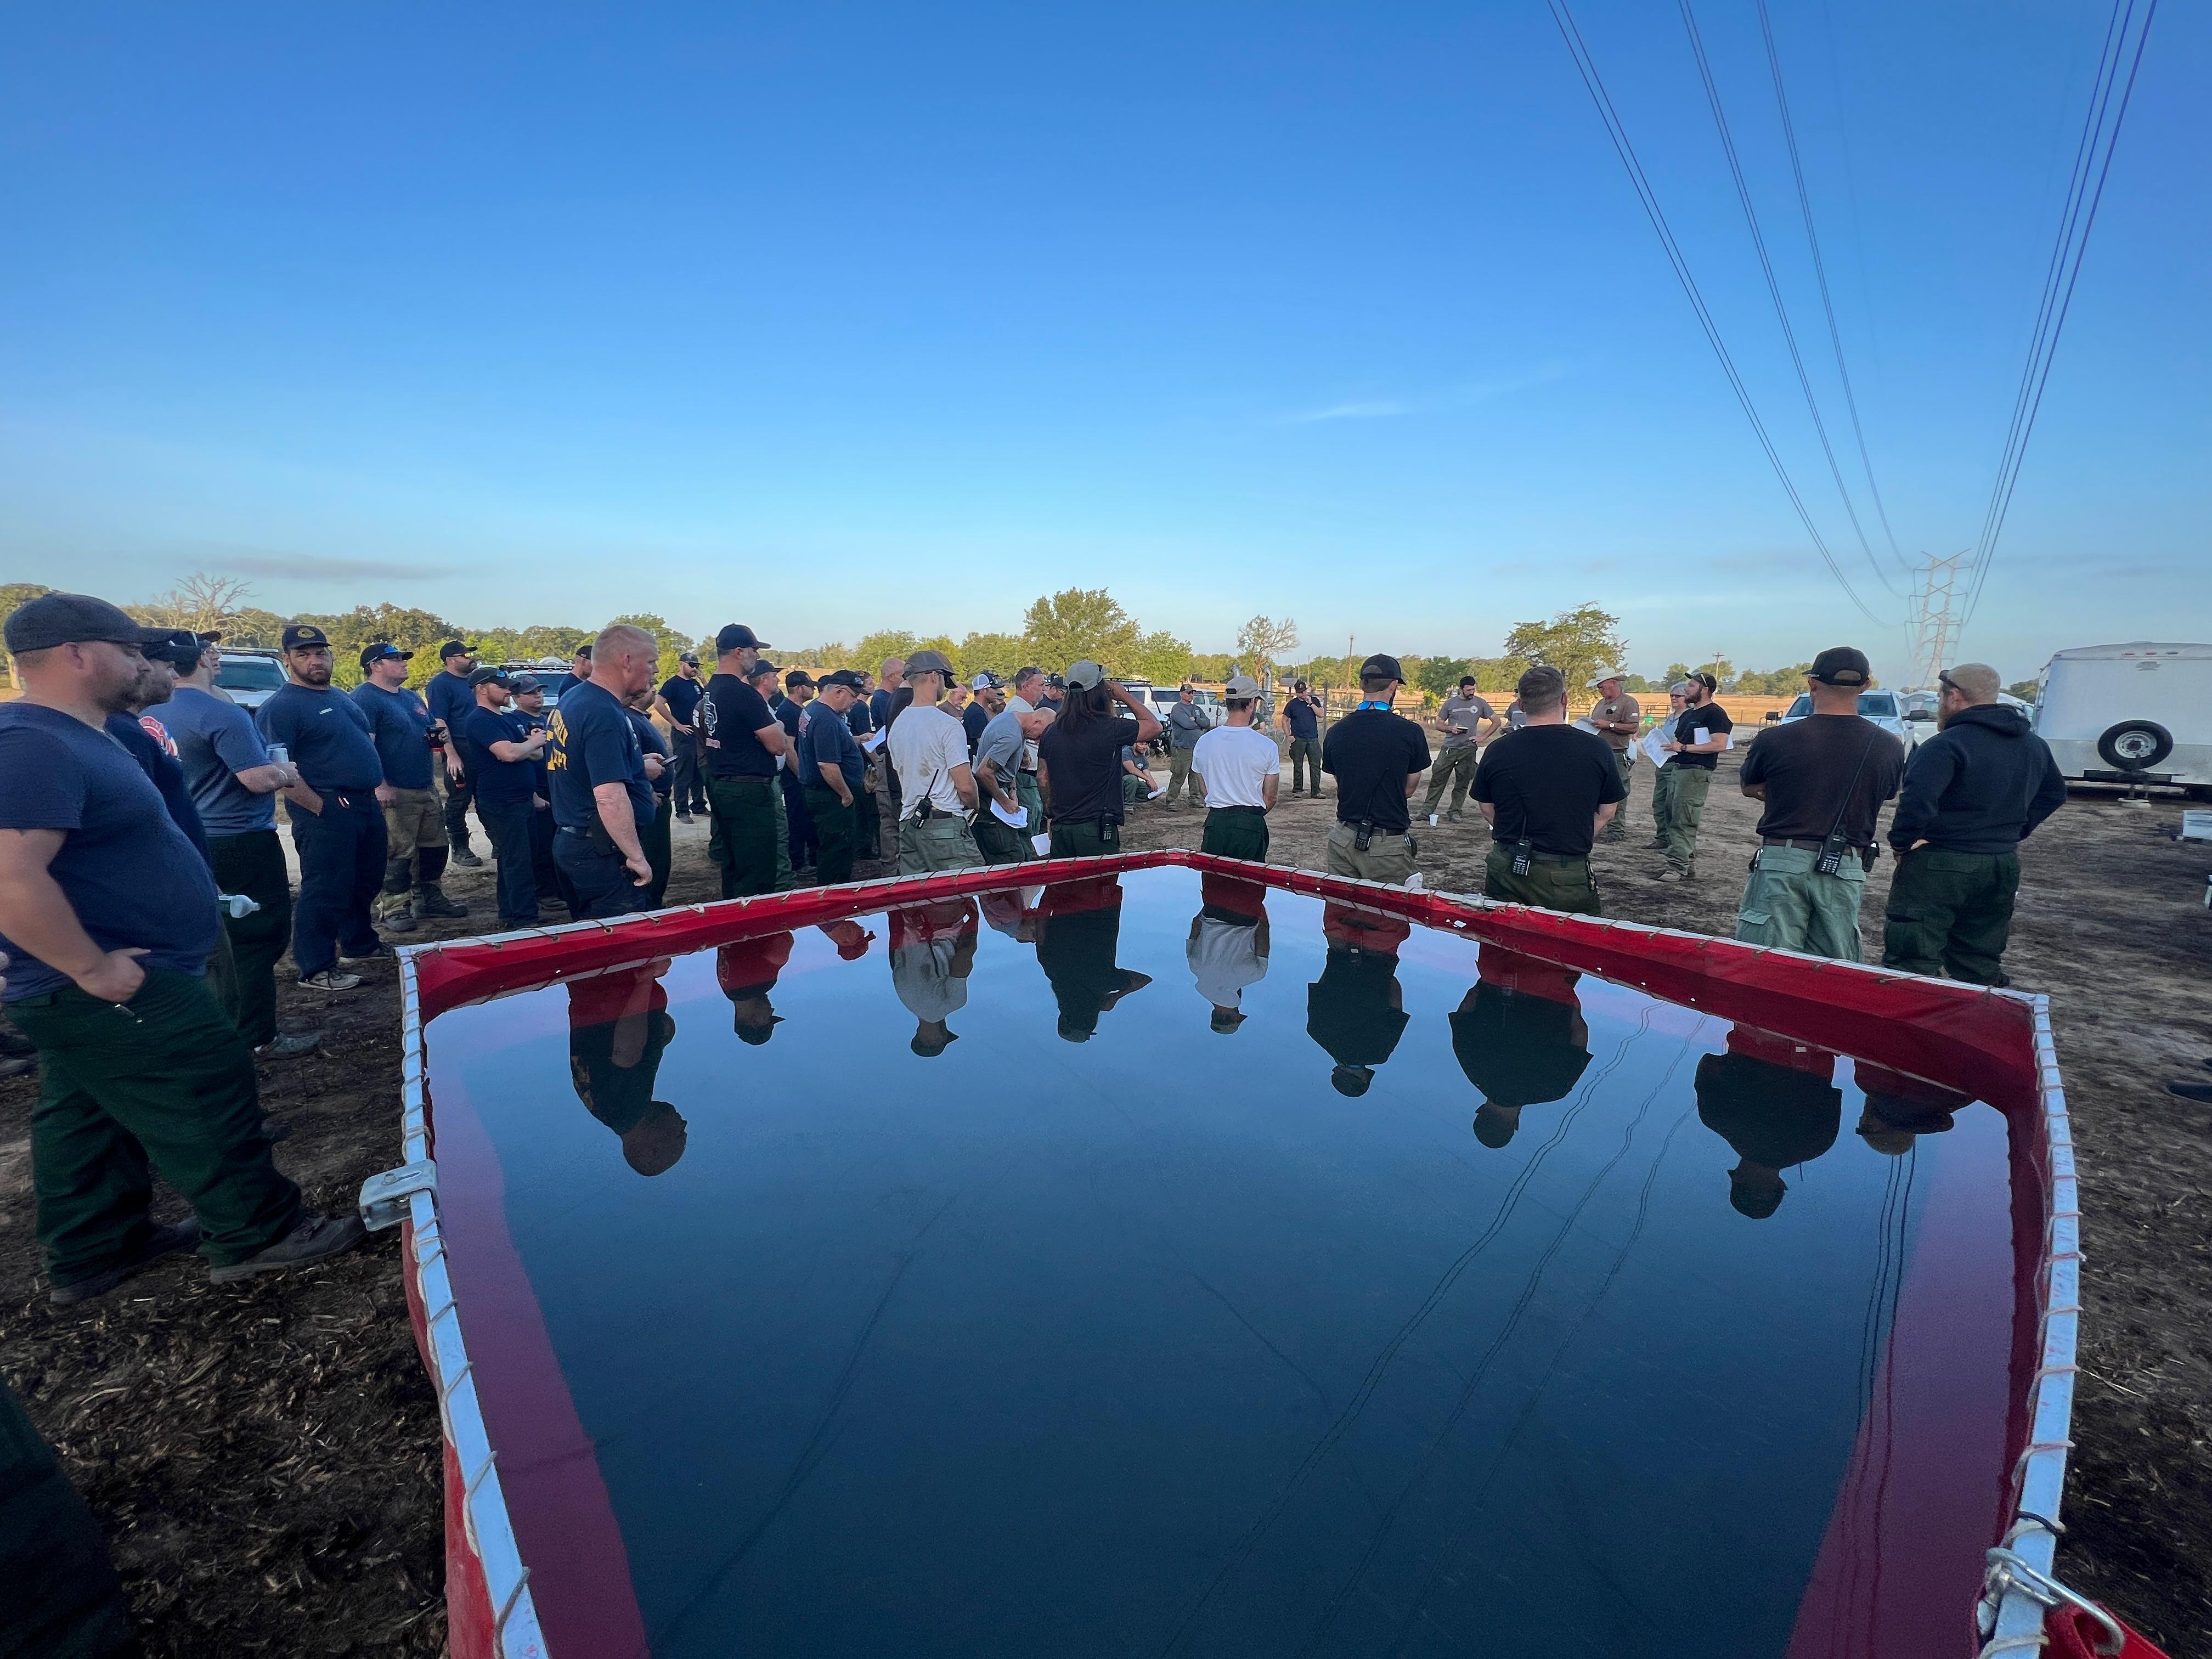 Approximately 60 people stand in a semi-circle.  Foreground has square, red tank filled with water casting a reflection of those standing nearby.